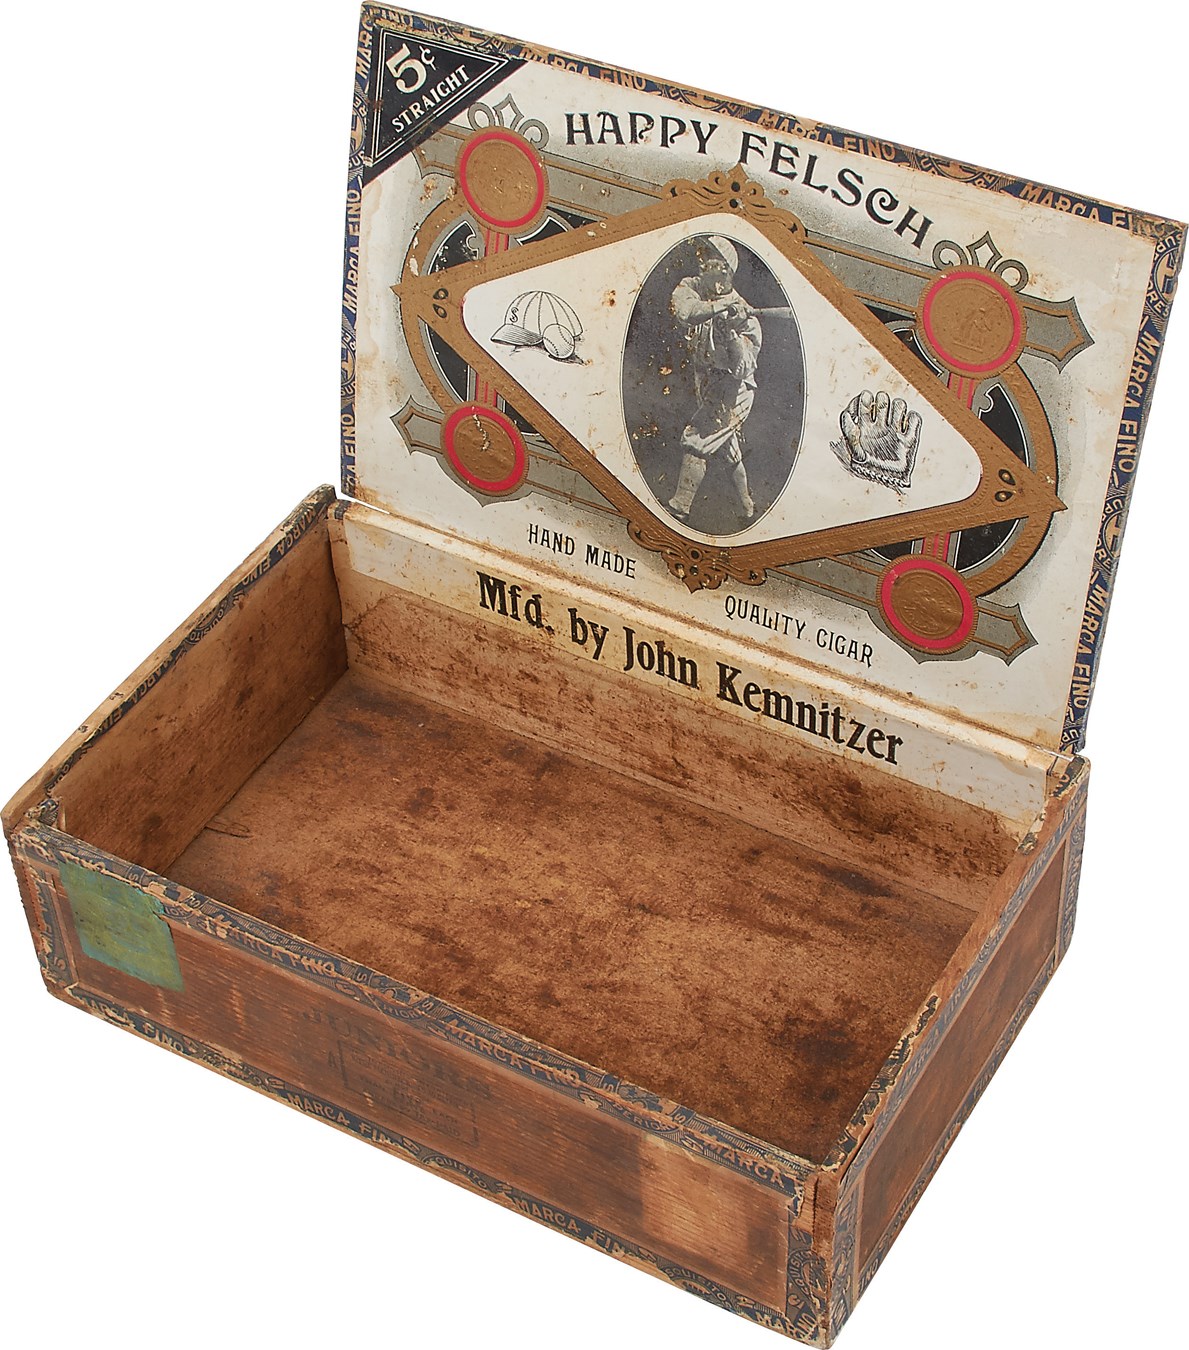 Happy Felsch 1917 World Champion Chicago White Sox Baseball Cigar Box - Only One Known